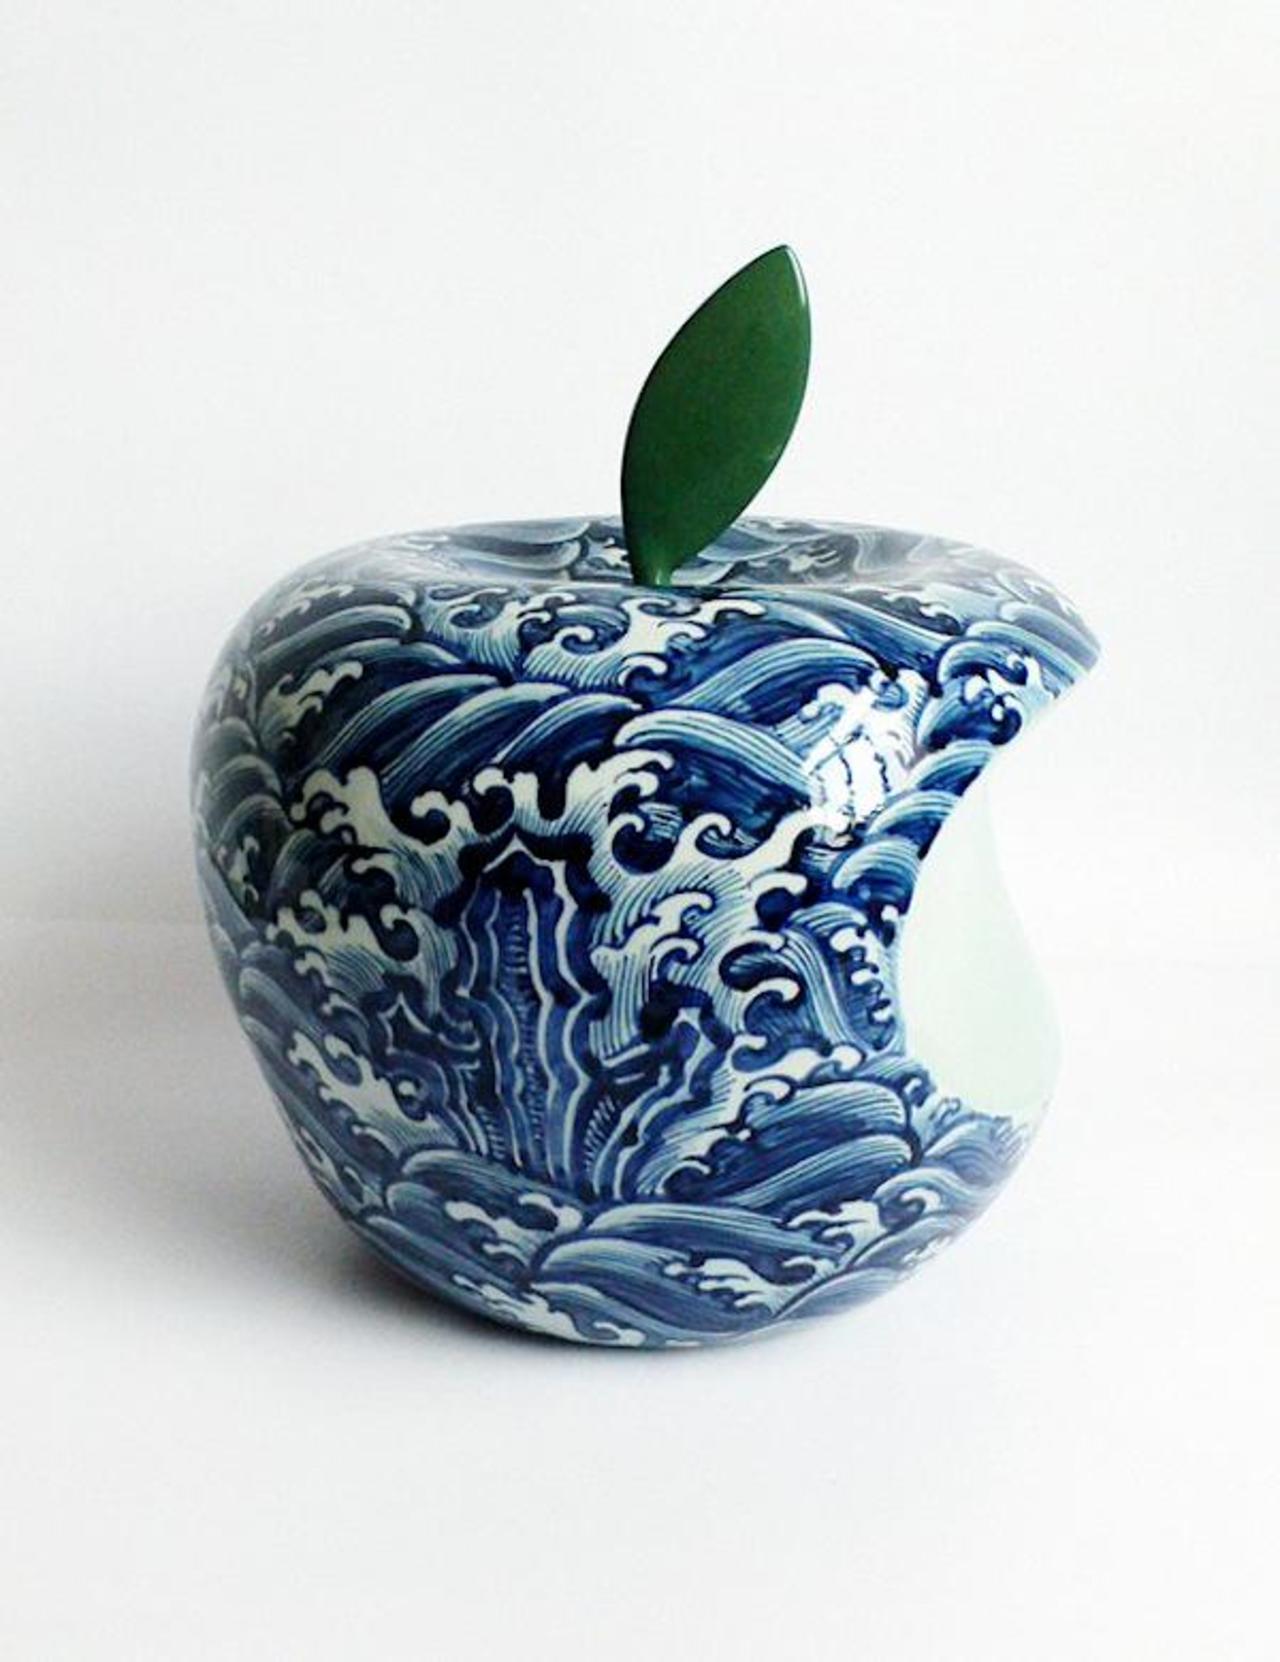 Contemporary art from #China
By Li Lihong
Corporate Logos as traditional Chinese Ceramics
#Apple #Sculpture #Art http://t.co/zk6jawsxEN